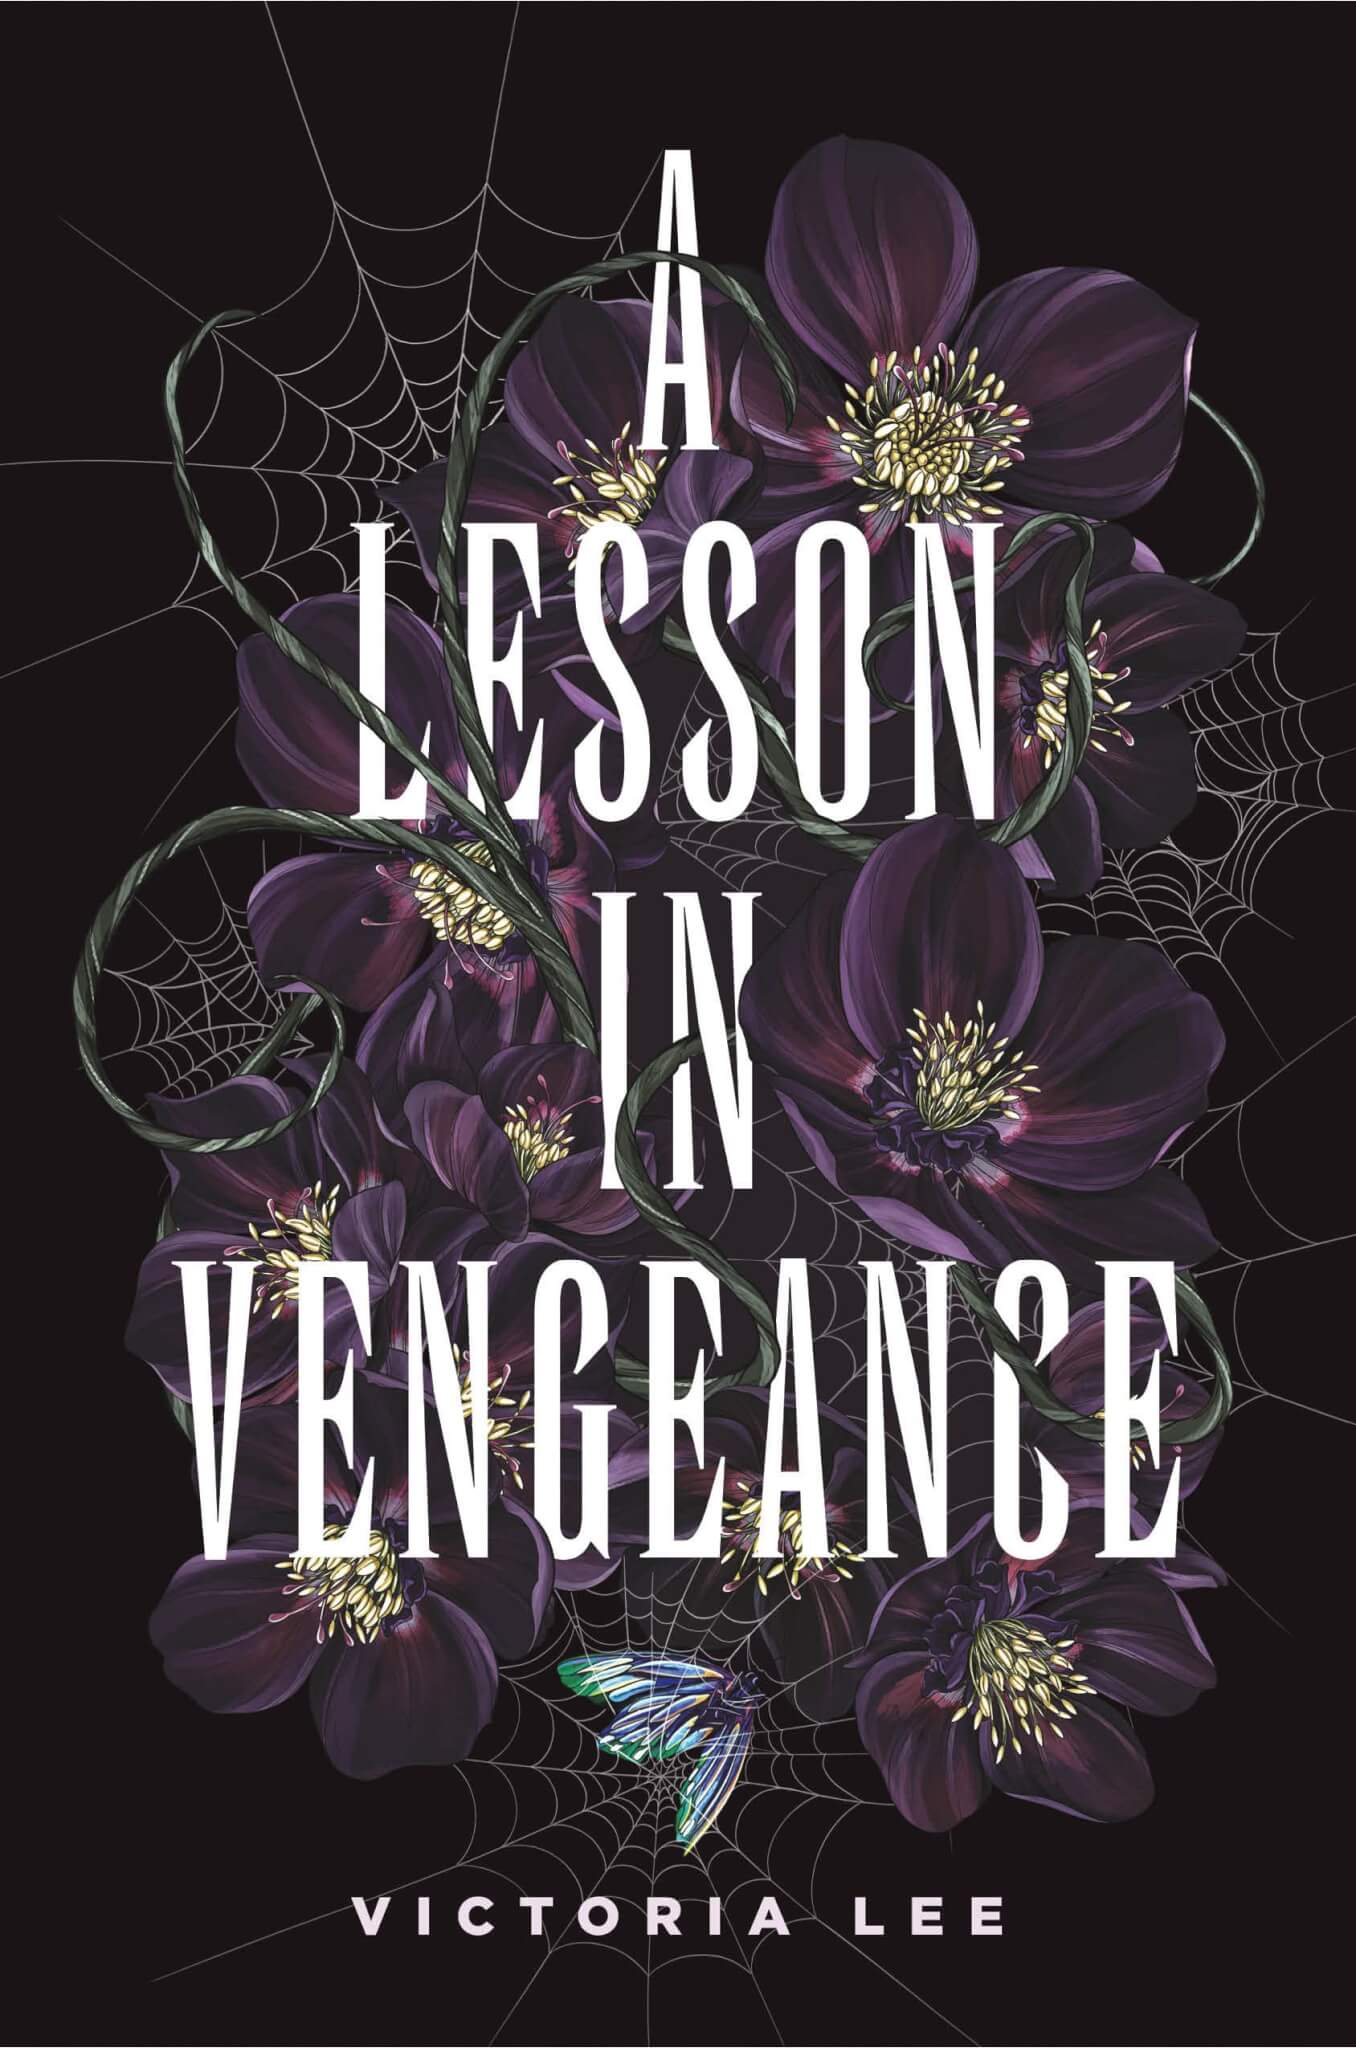 “A Lesson in Vengeance” (2021) by Victoria Lee